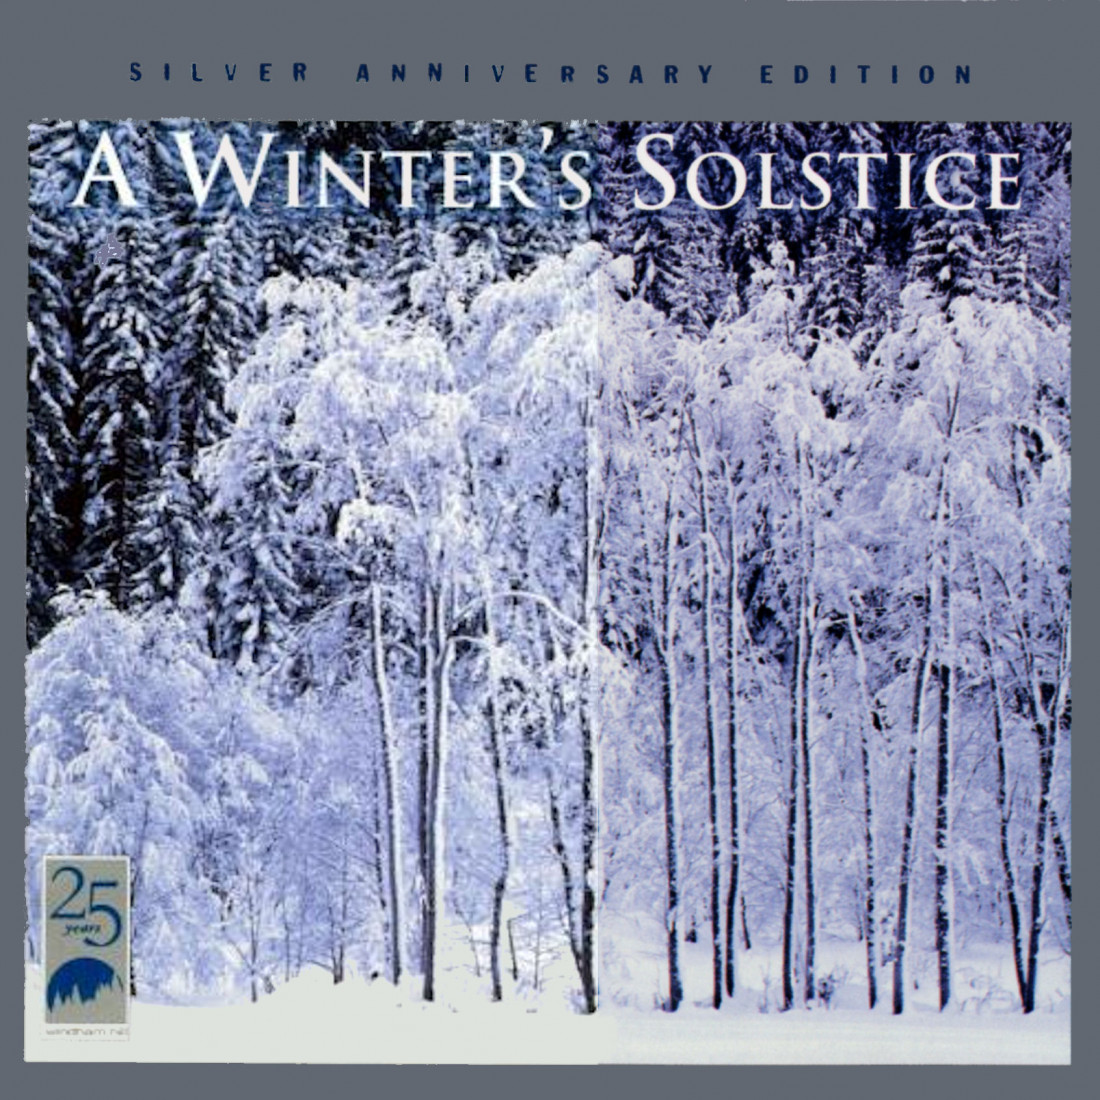 [Tim Story] When Comes December (A Winter s Solstice,Silver anniversary edition) Photo-Image